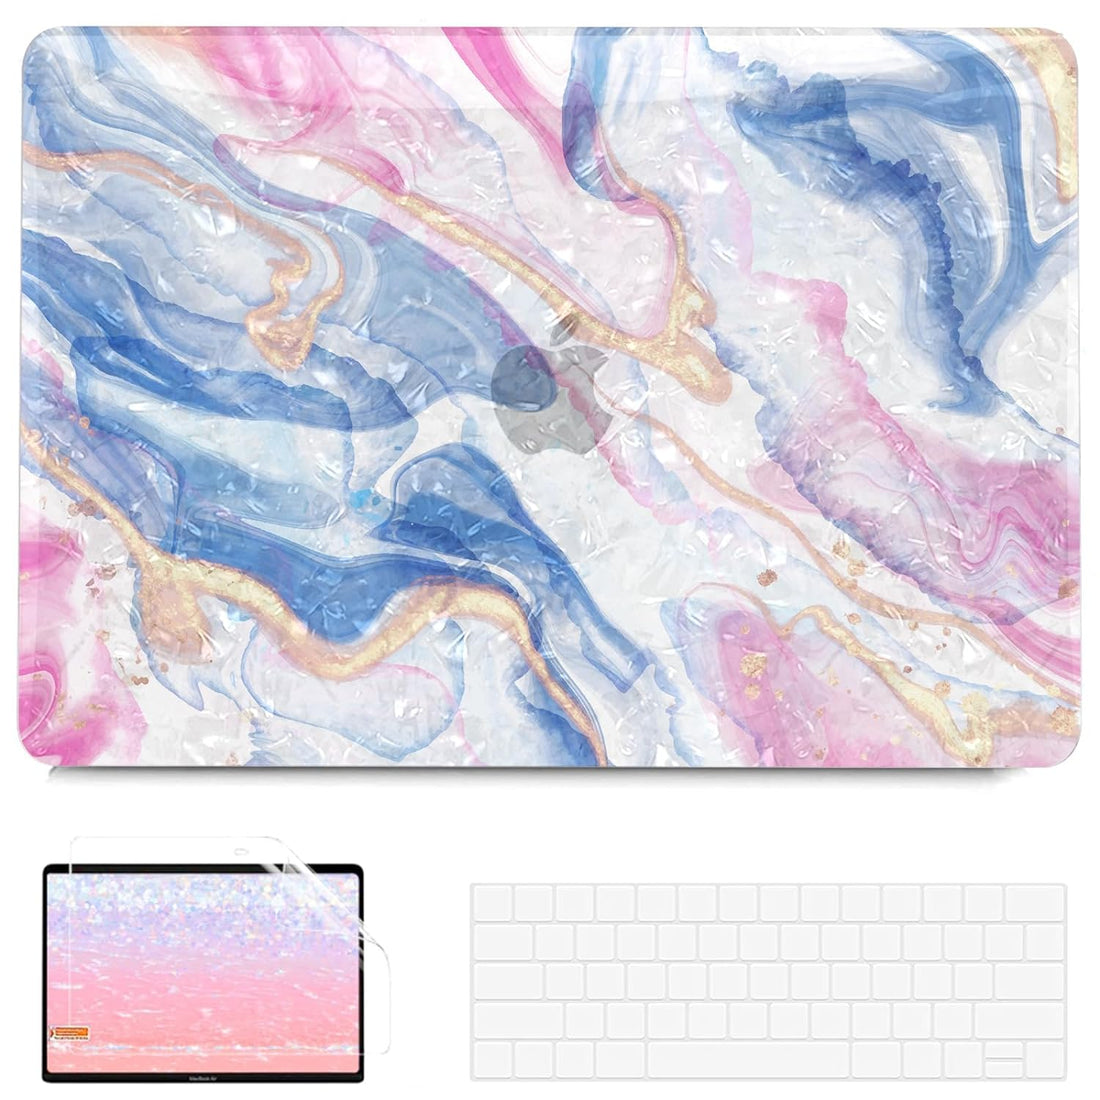 G JGOO Compatible with MacBook Air 13 inch Case 2022 2021 2020 2019 2018 Release M1 A2337 A2179 A1932 Touch ID, Glitter Pearl Hard Shell Case + 2 Keyboard Covers + Screen Protector, Colorful Marble